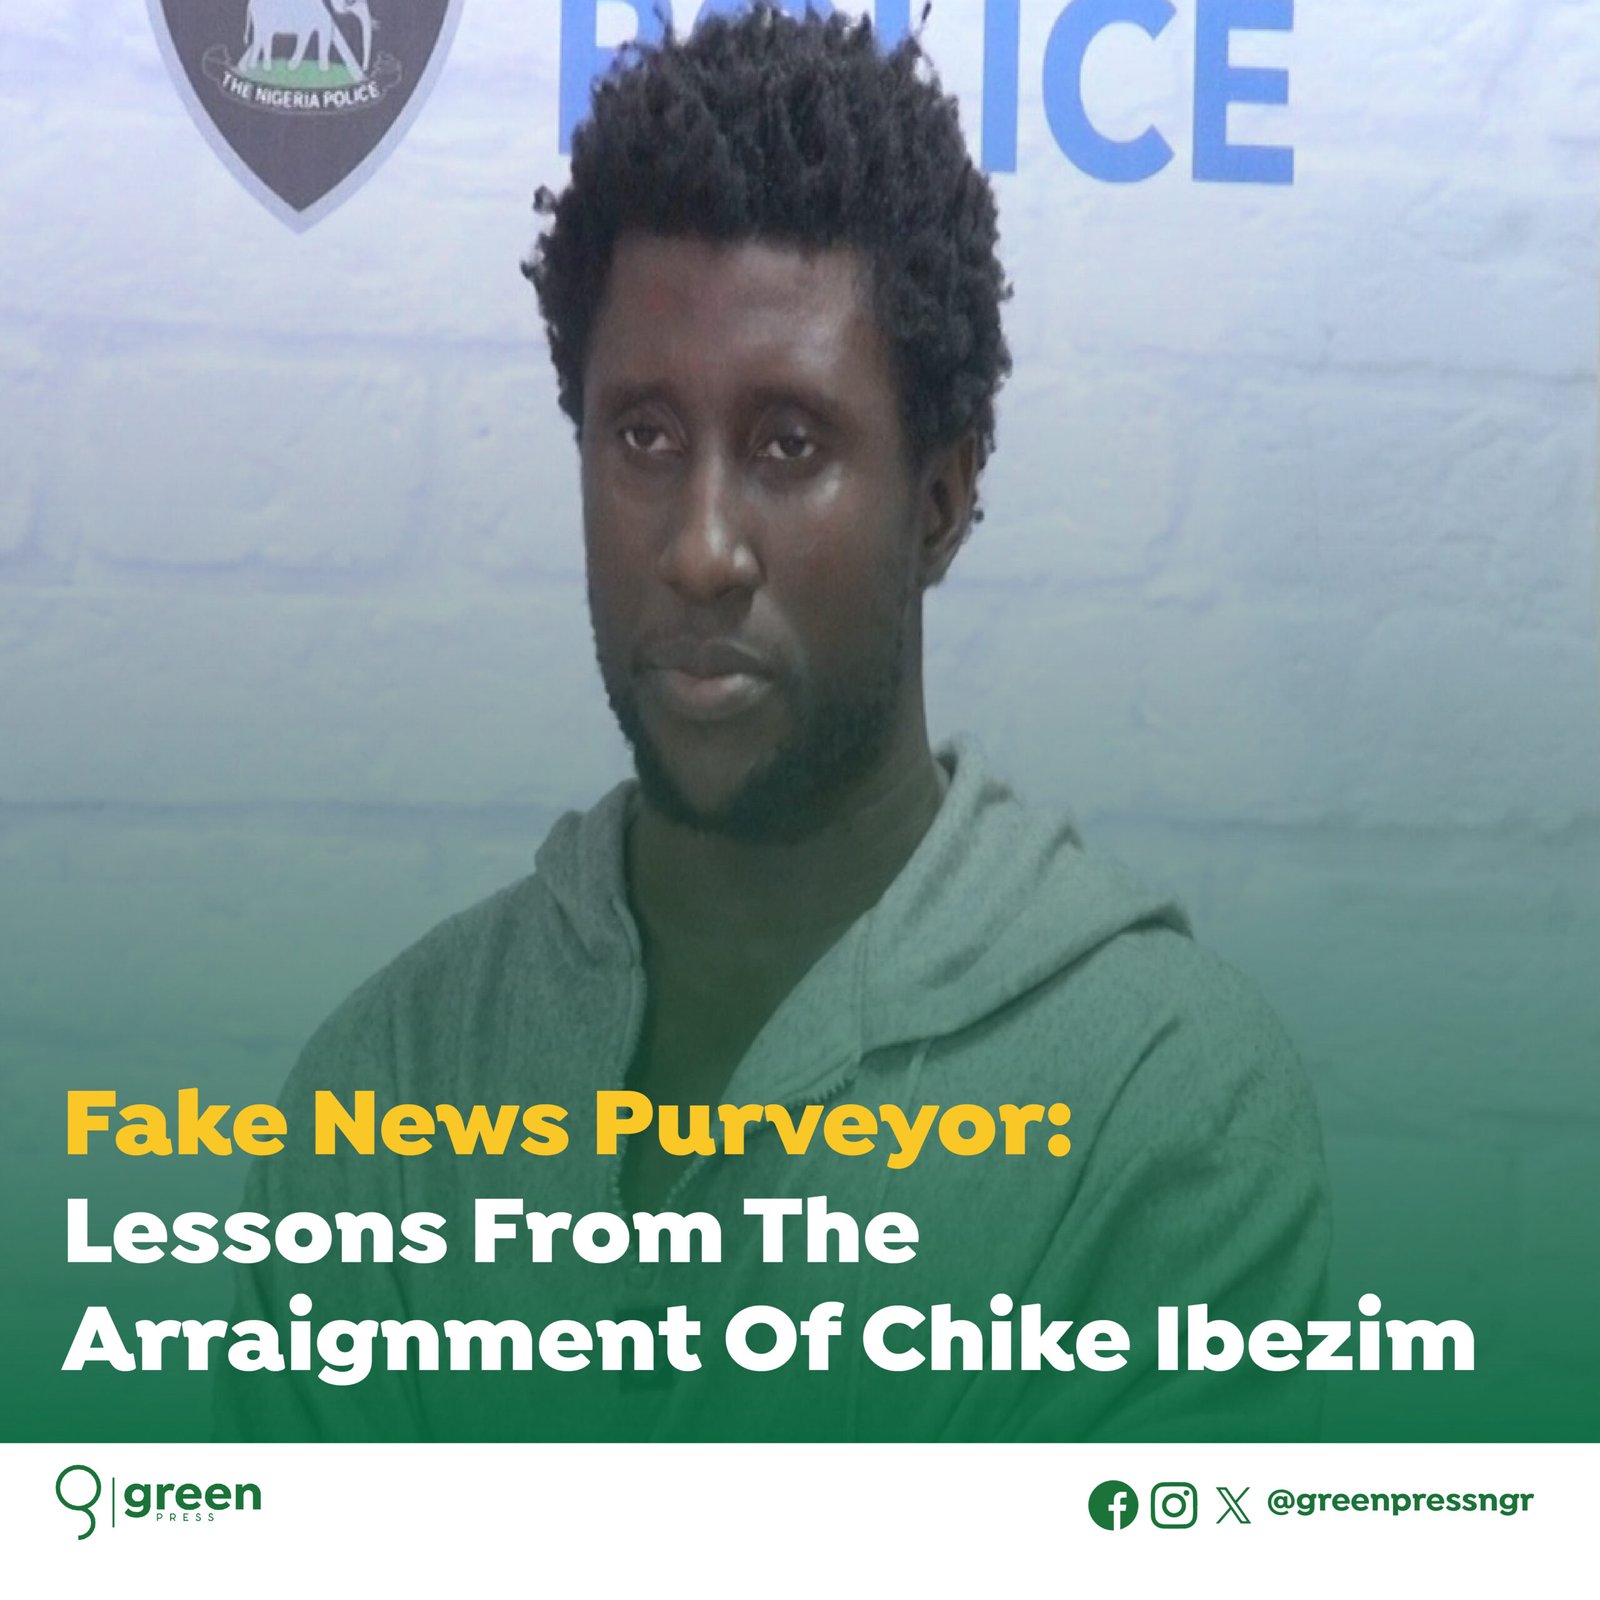 Fake News Purveyor: Lessons From The Arraignment Of Chike Ibezim